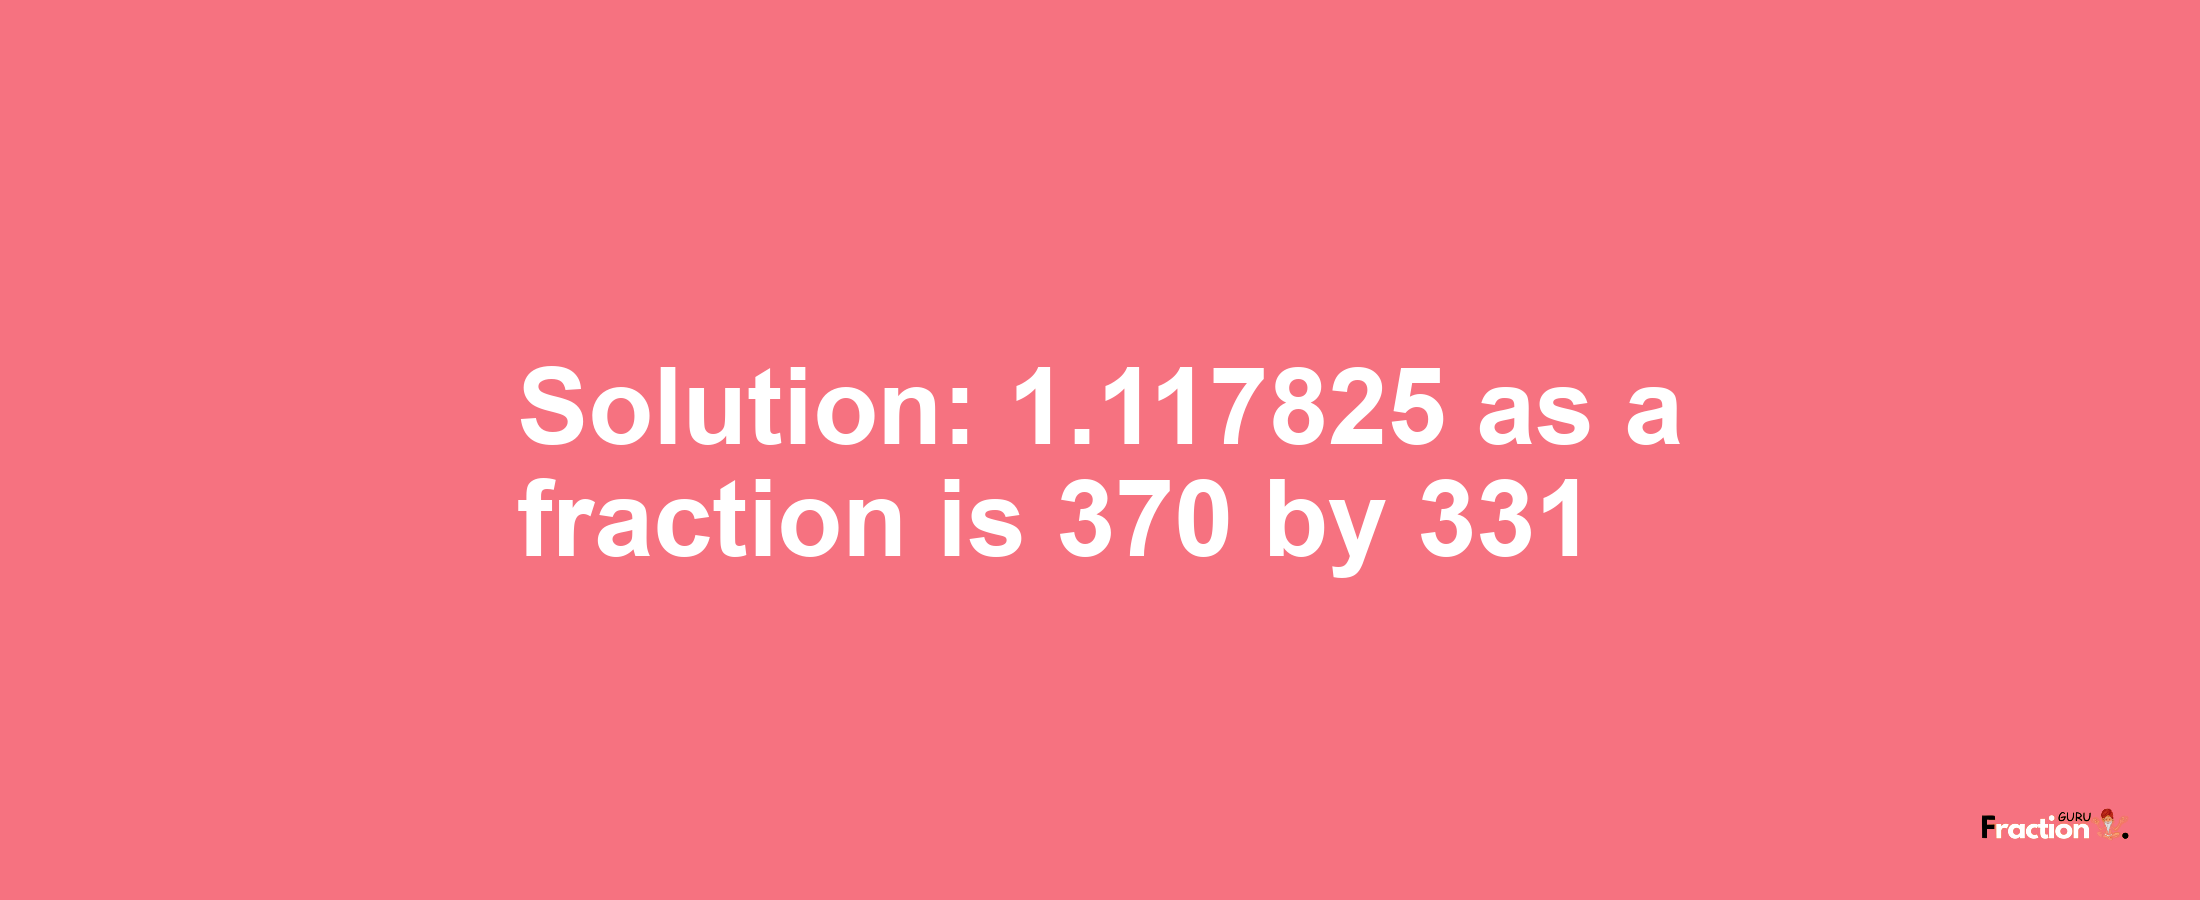 Solution:1.117825 as a fraction is 370/331